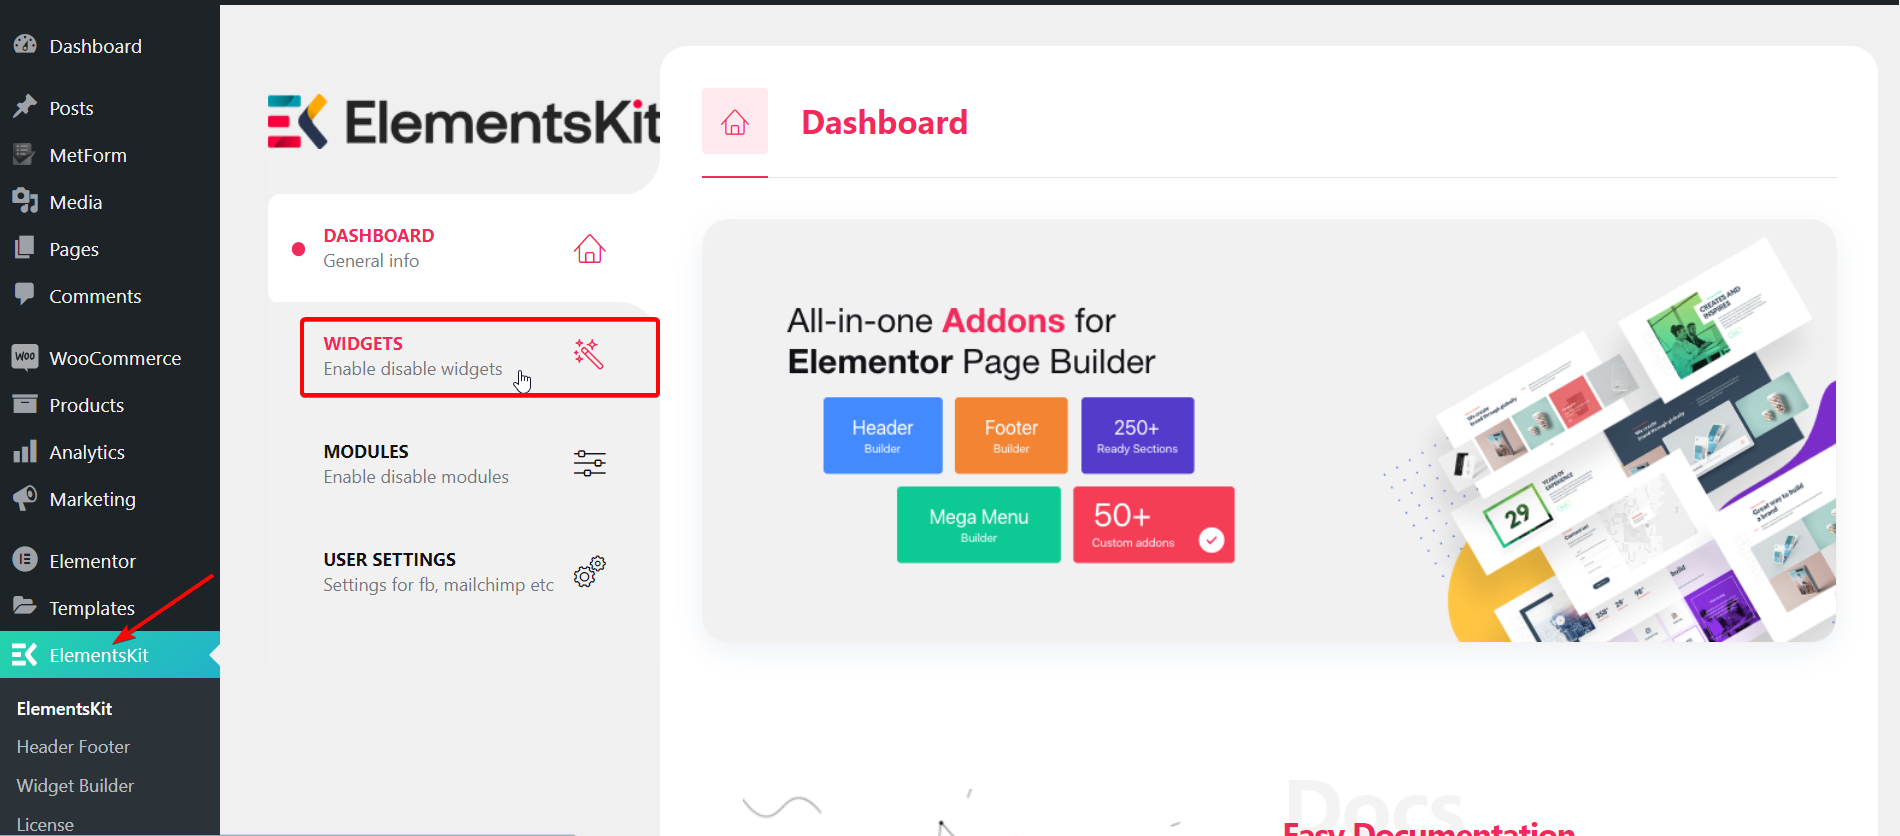 Navigate to ElementsKit and select Widgets- Add Pinterest feed